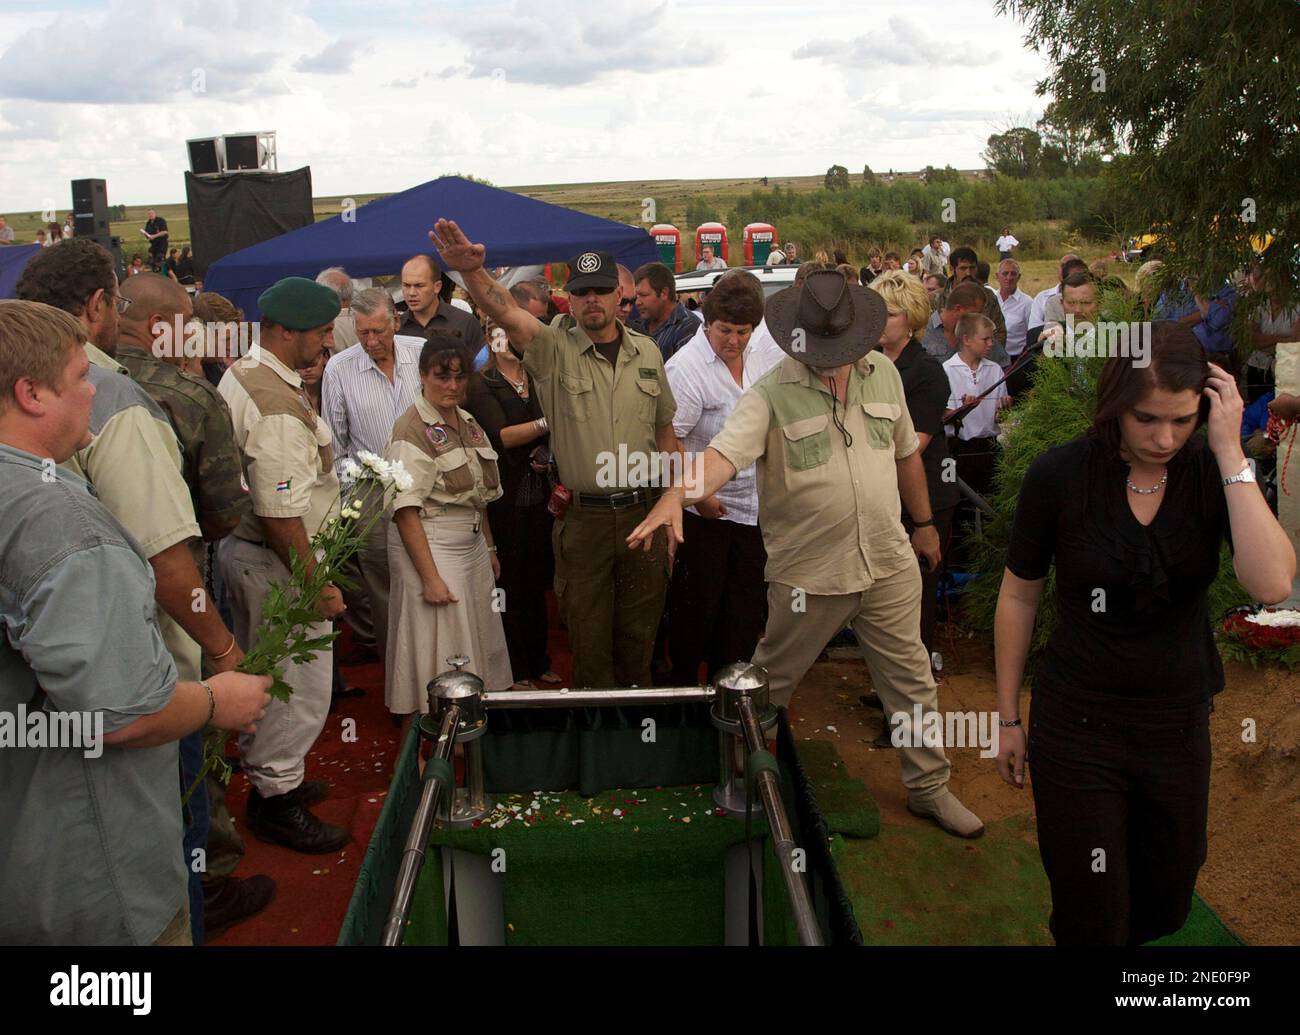 AWB leader Eugene Terreblanche's funeral in Ventersdorp, South Africa, in  pictures